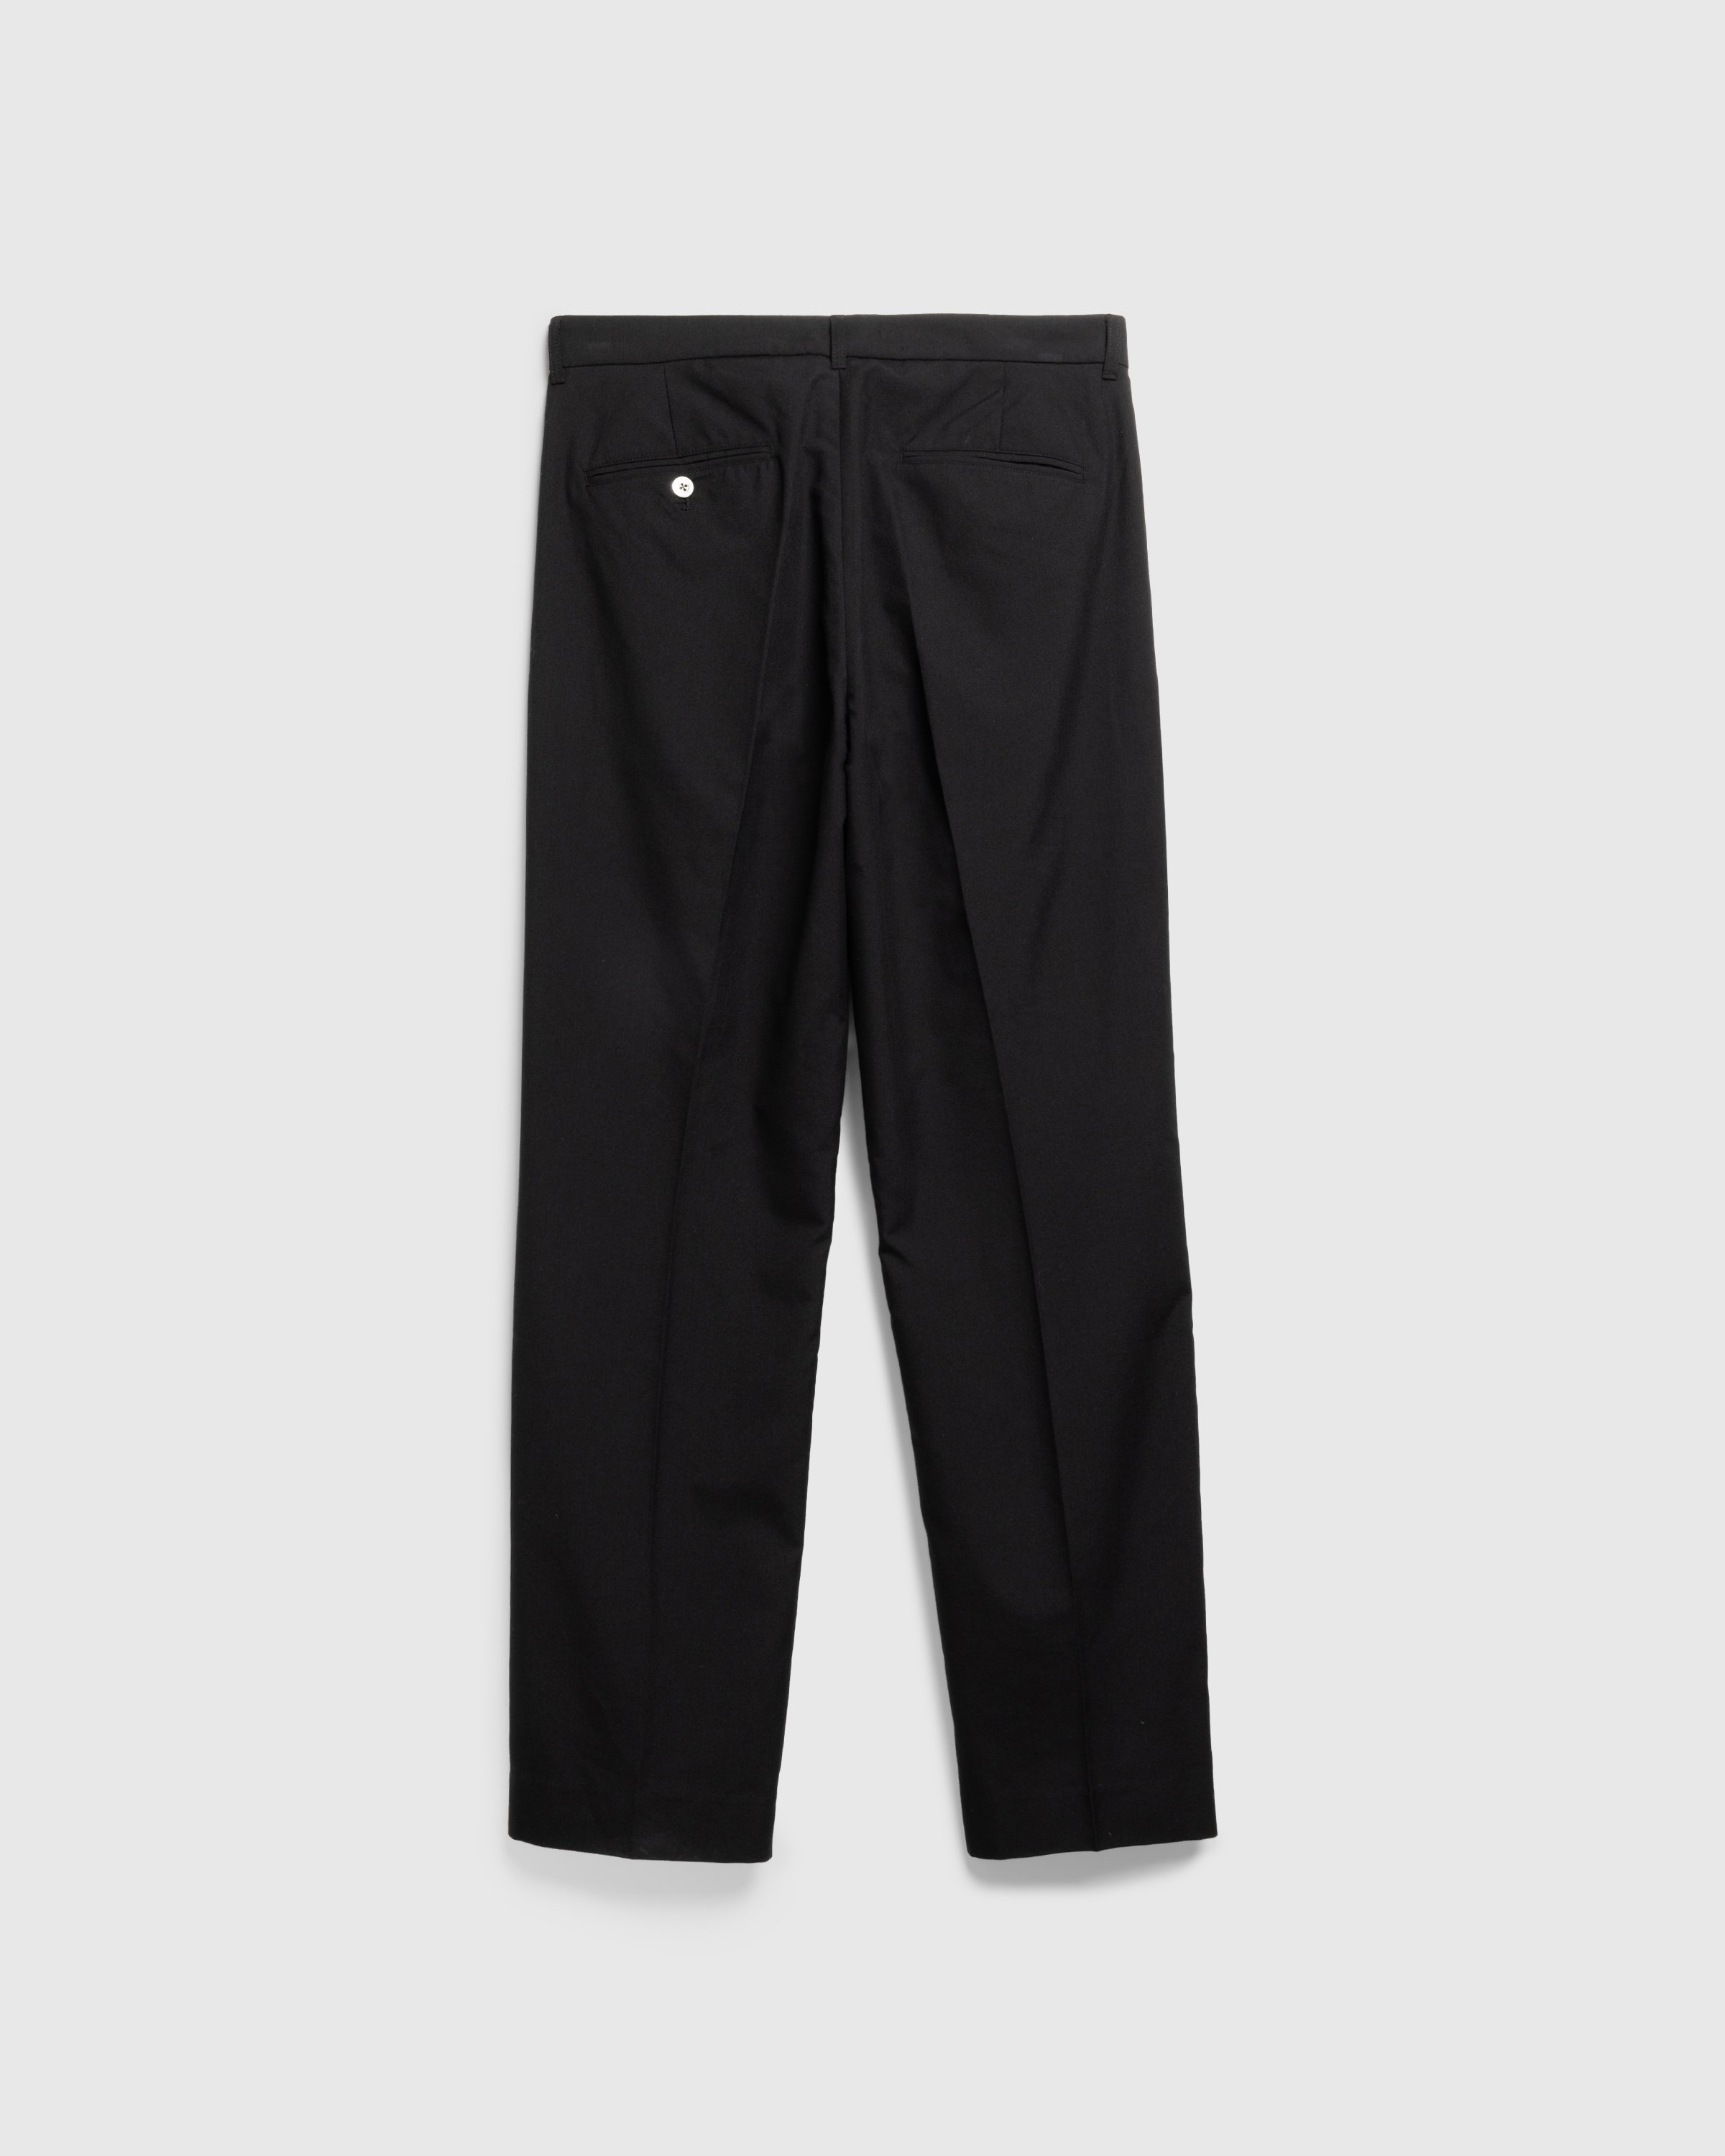 Highsnobiety HS05 - Tropical Suiting Pants - Clothing - Black - Image 2